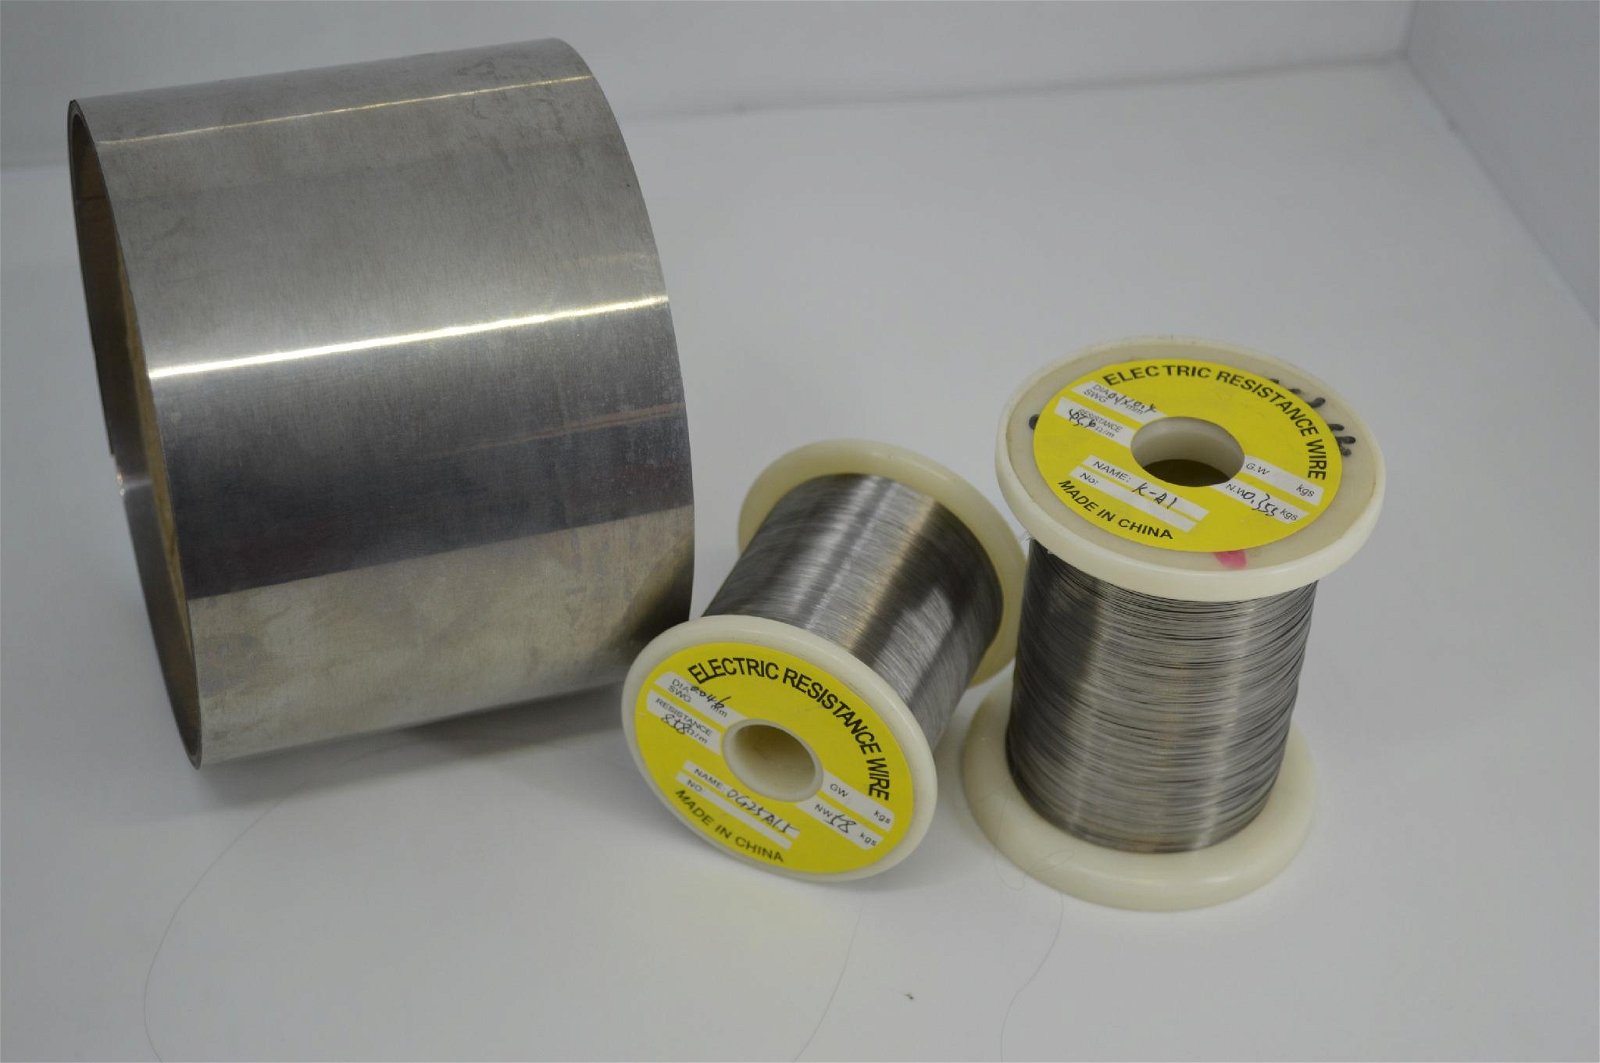 nickel chrome 70/30 heating resistance wire